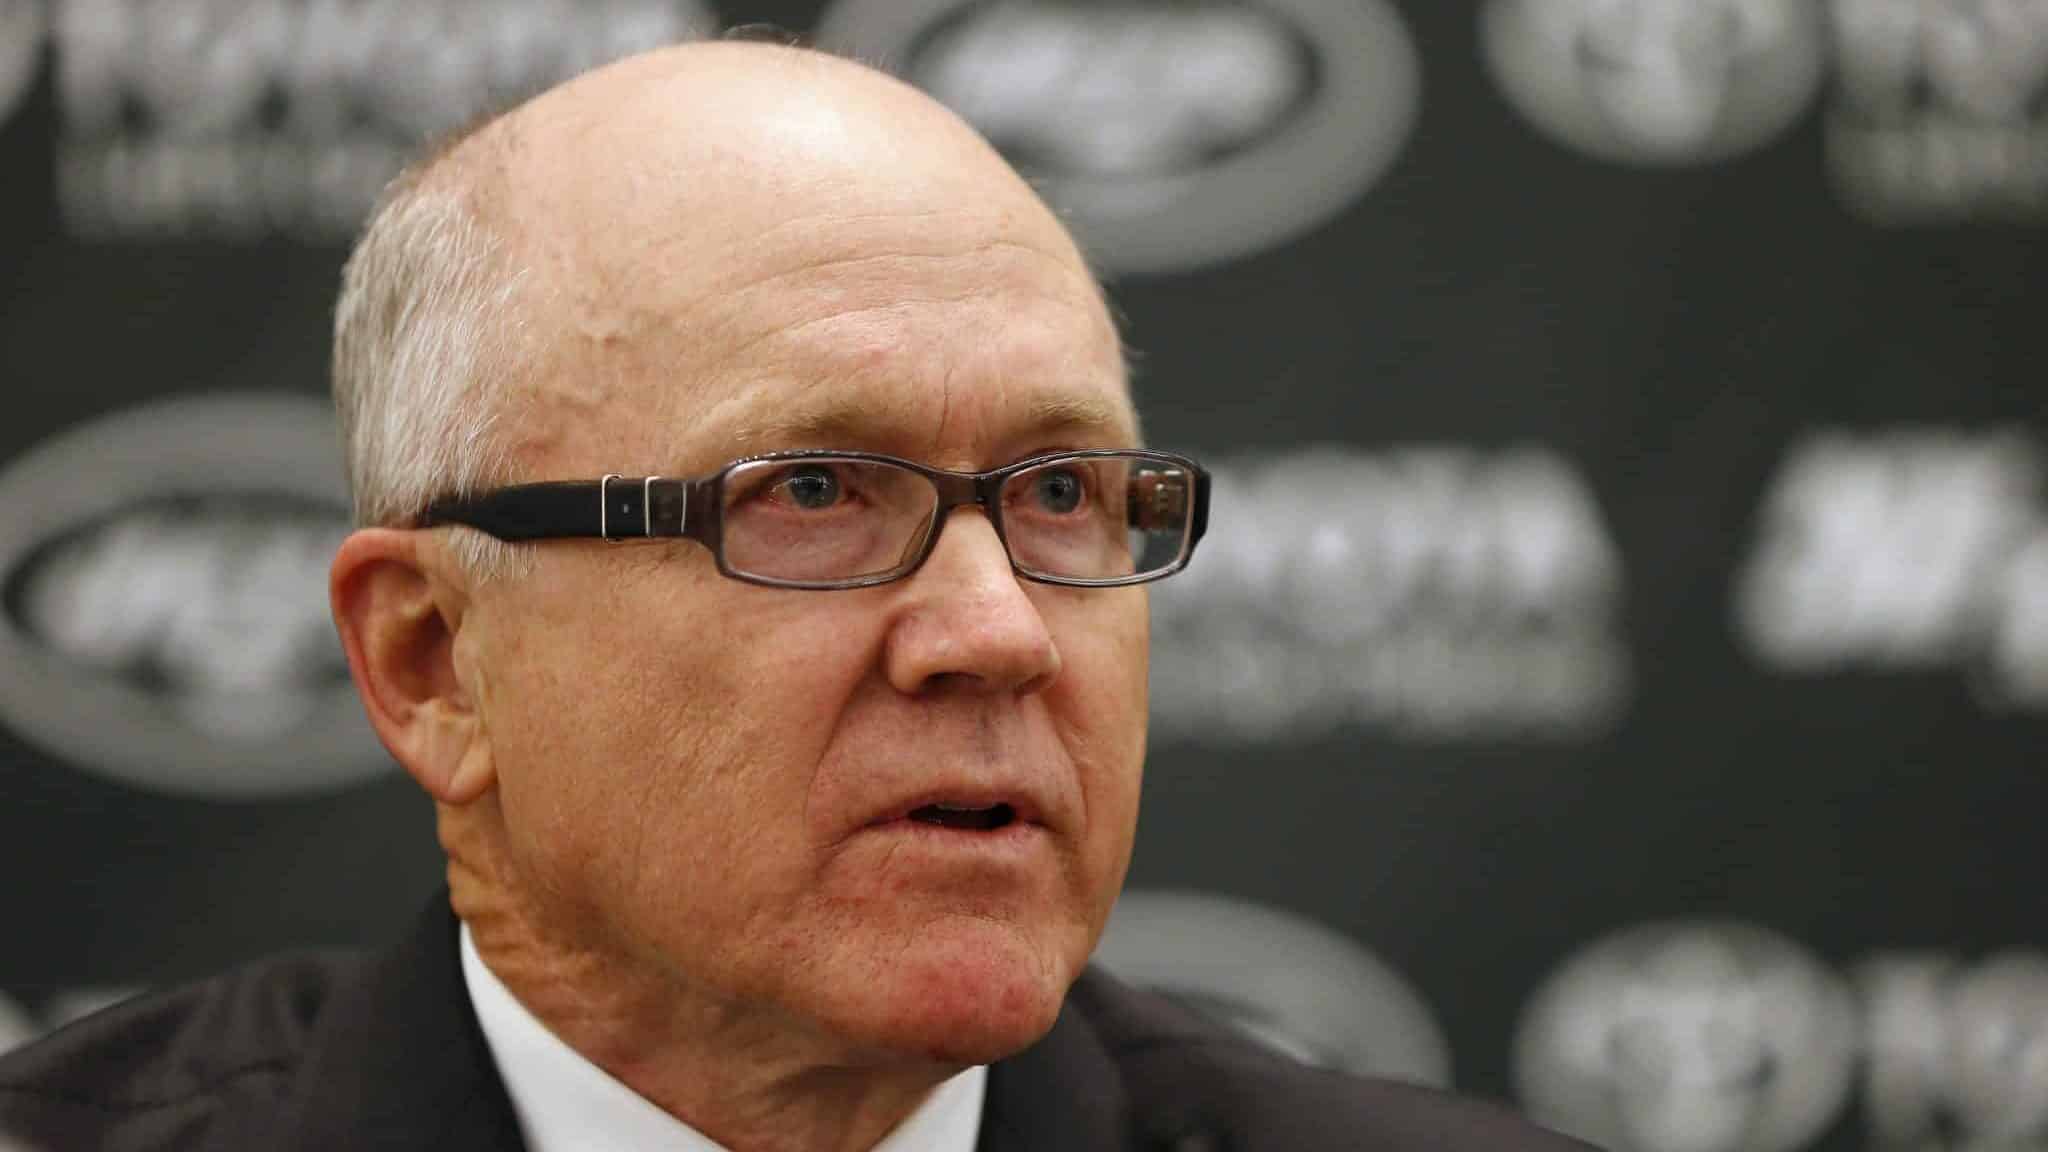 FLORHAM PARK, NJ - JANUARY 21: Woody Johnson, owner of the New York Jets addresses the media during a press conference to introduce new general manager Mike Maccagnan and head cowch Todd Bowles on January 21, 2015 in Florham Park, New Jersey.